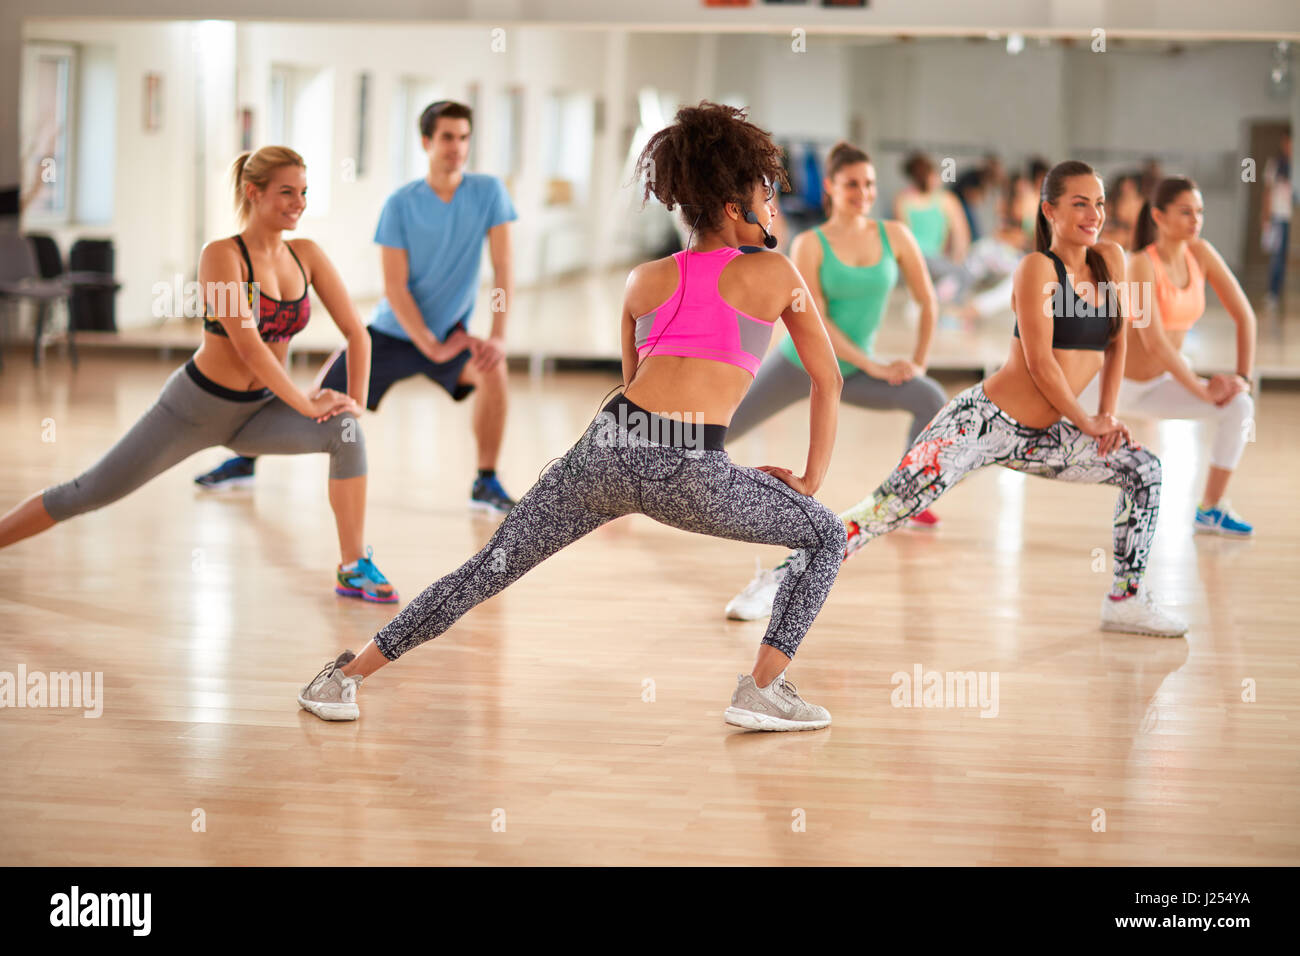 Young group of fitness exercisers in colorful sport clothes with female instructor in fitness class Stock Photo